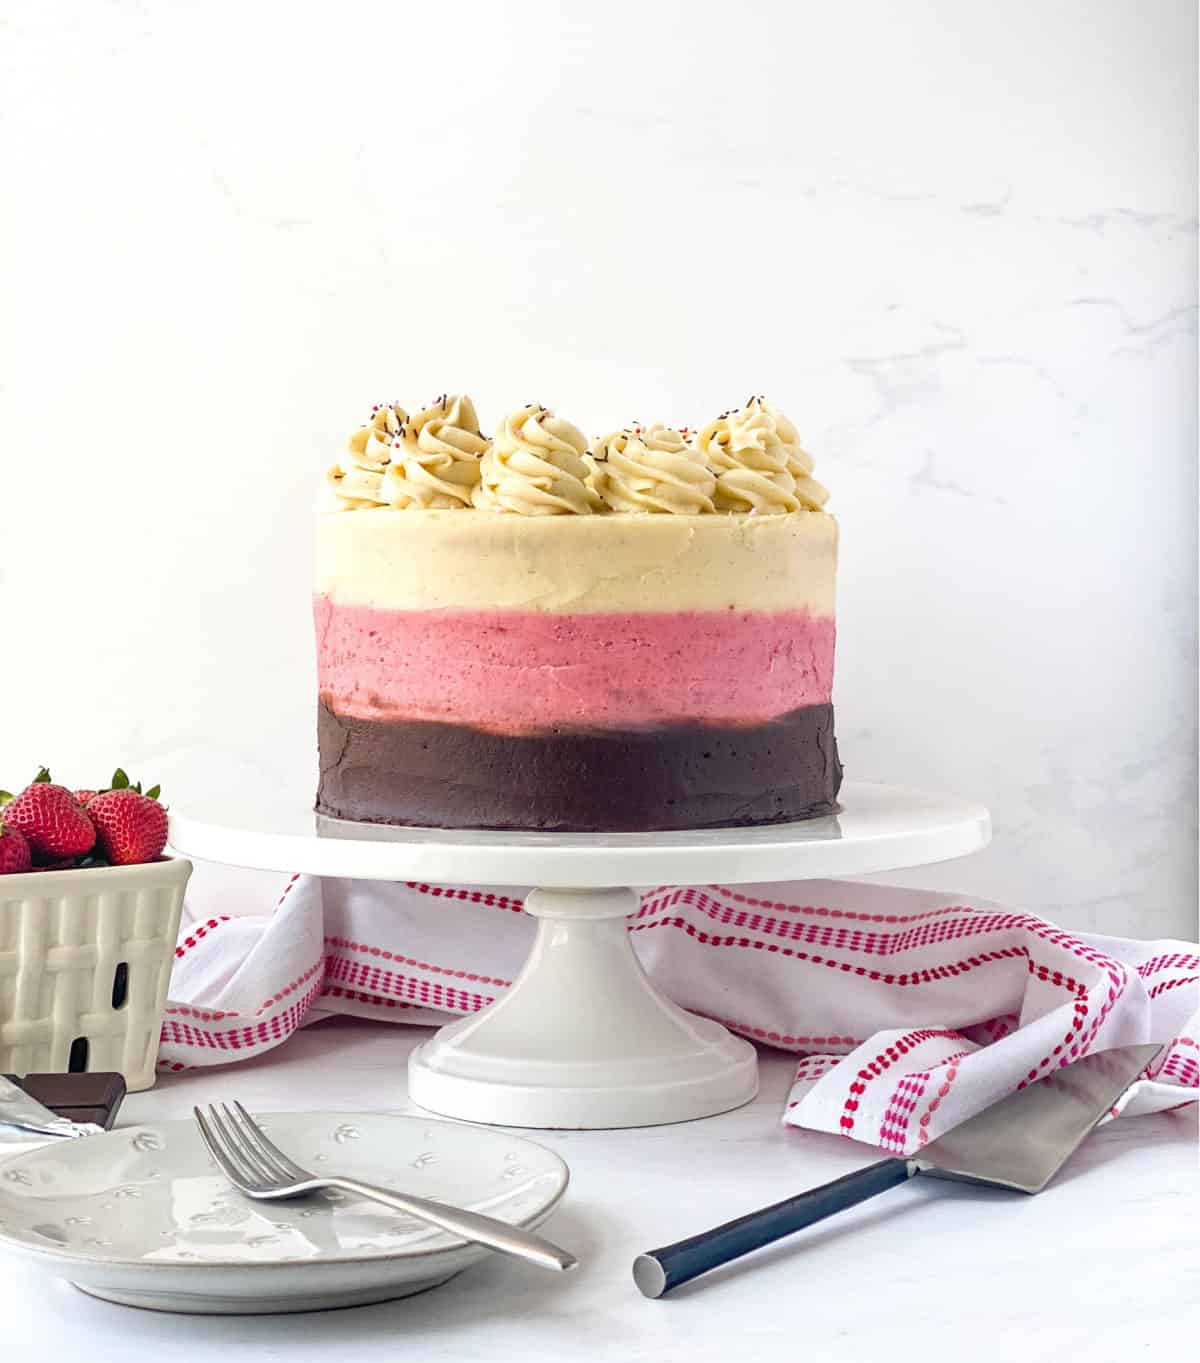 Neapolitan Cake on a white cake stand with strawberries nearby.